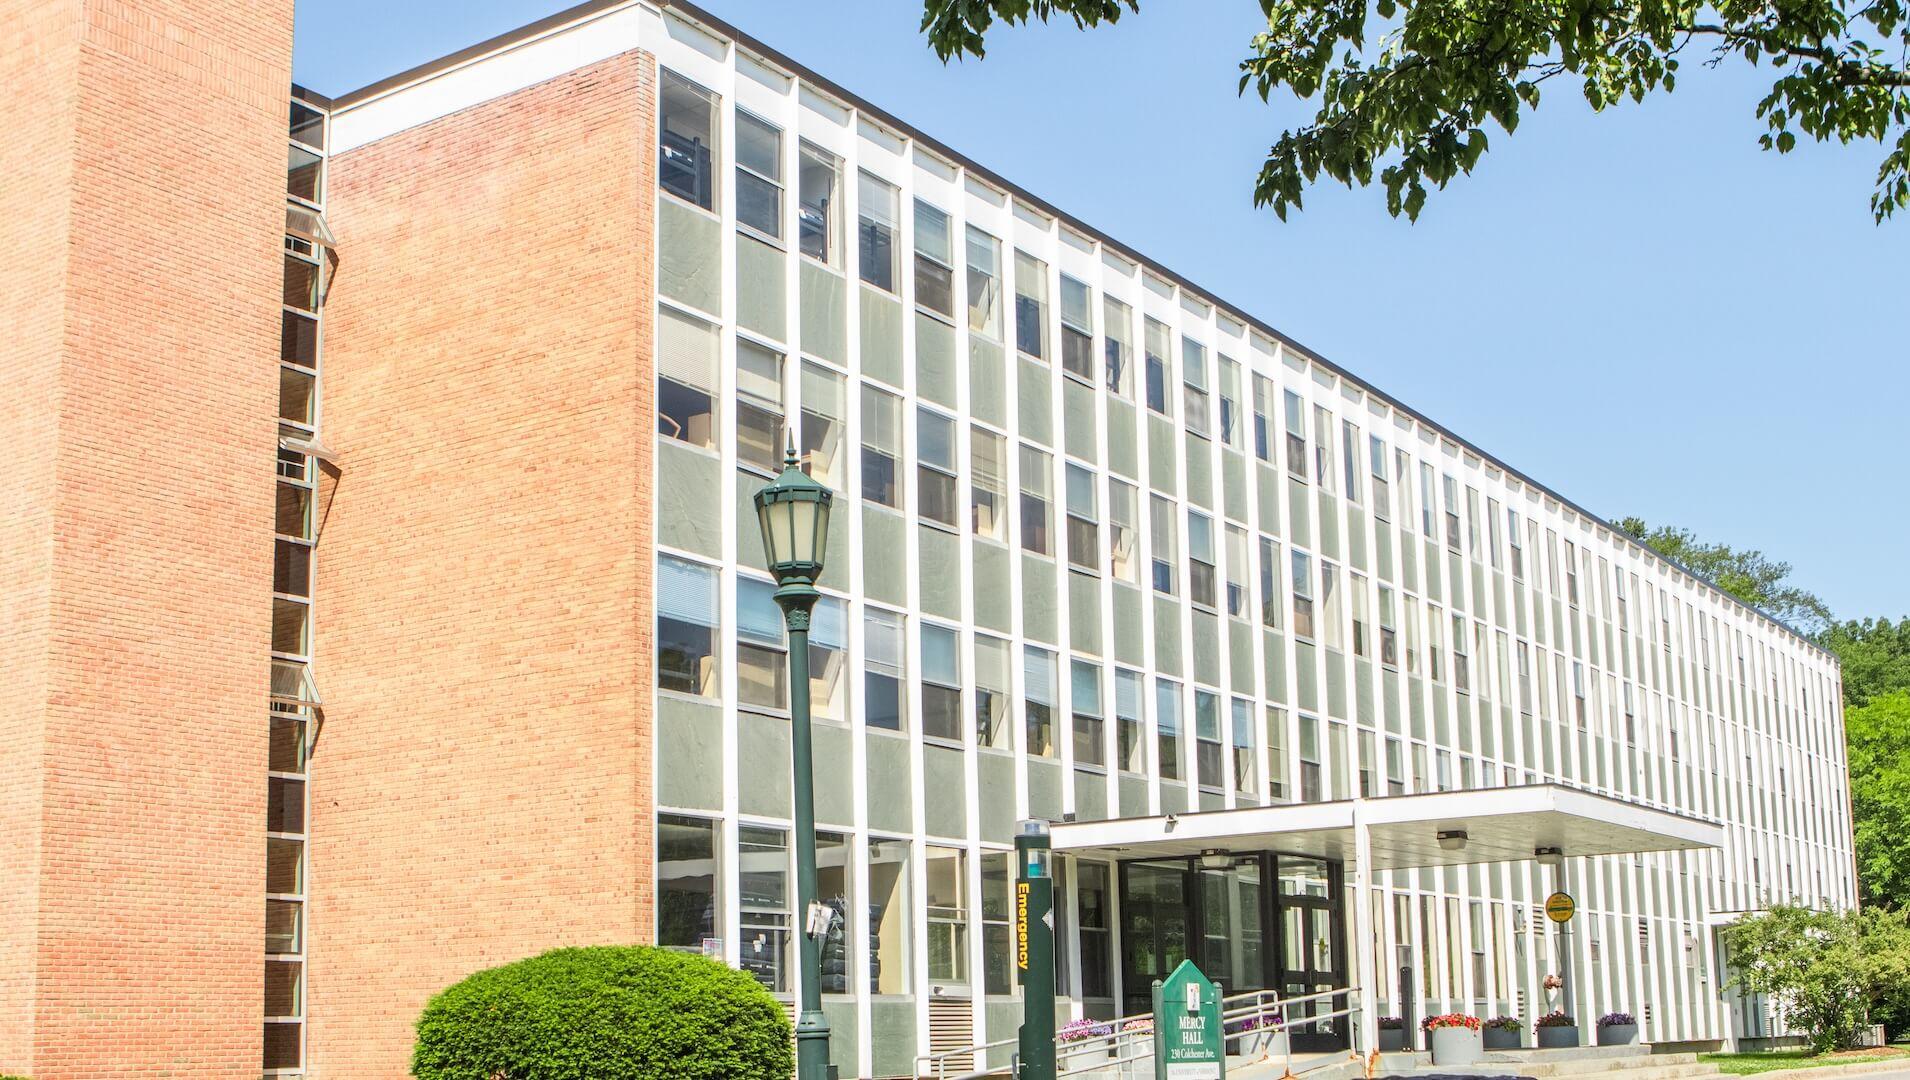 A 4-story brick residence hall with a large wall of windows.